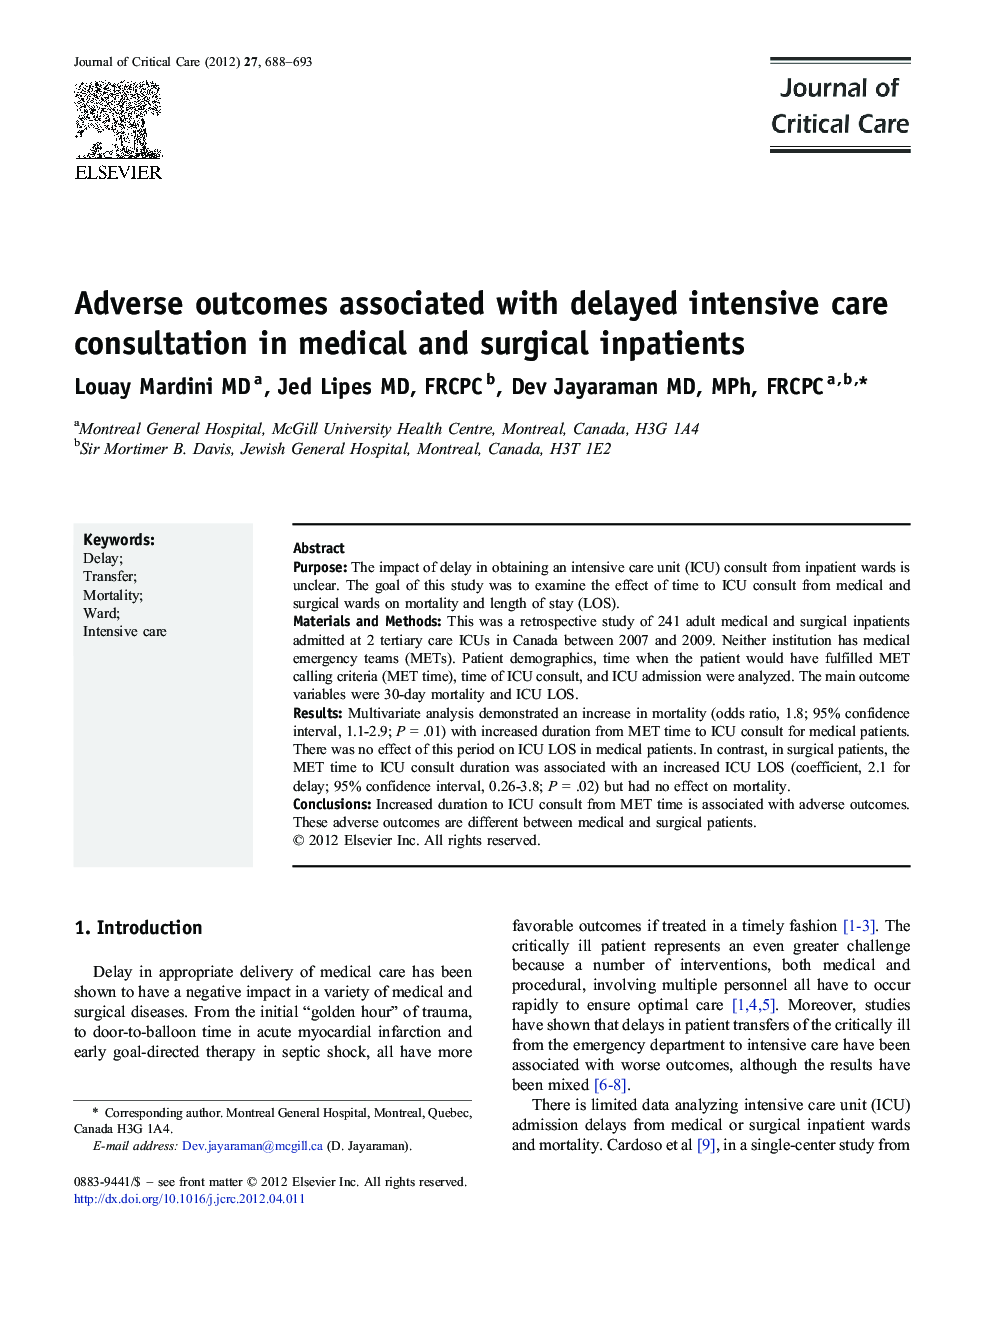 Adverse outcomes associated with delayed intensive care consultation in medical and surgical inpatients